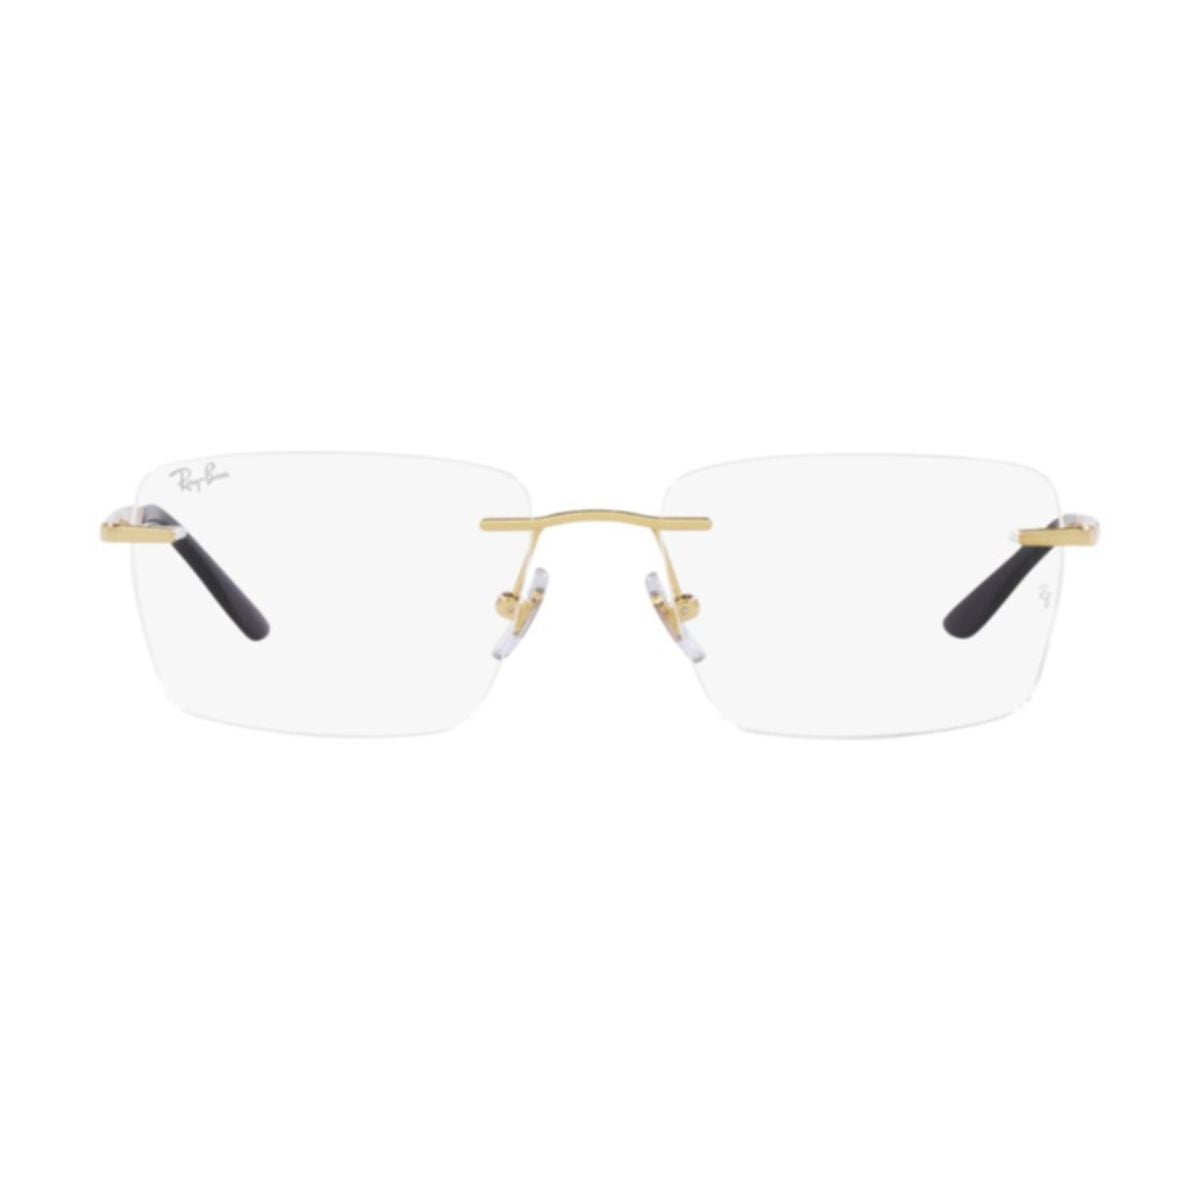 "shop Rayban 6506I 2500 square metal frame for men and women at optorium"